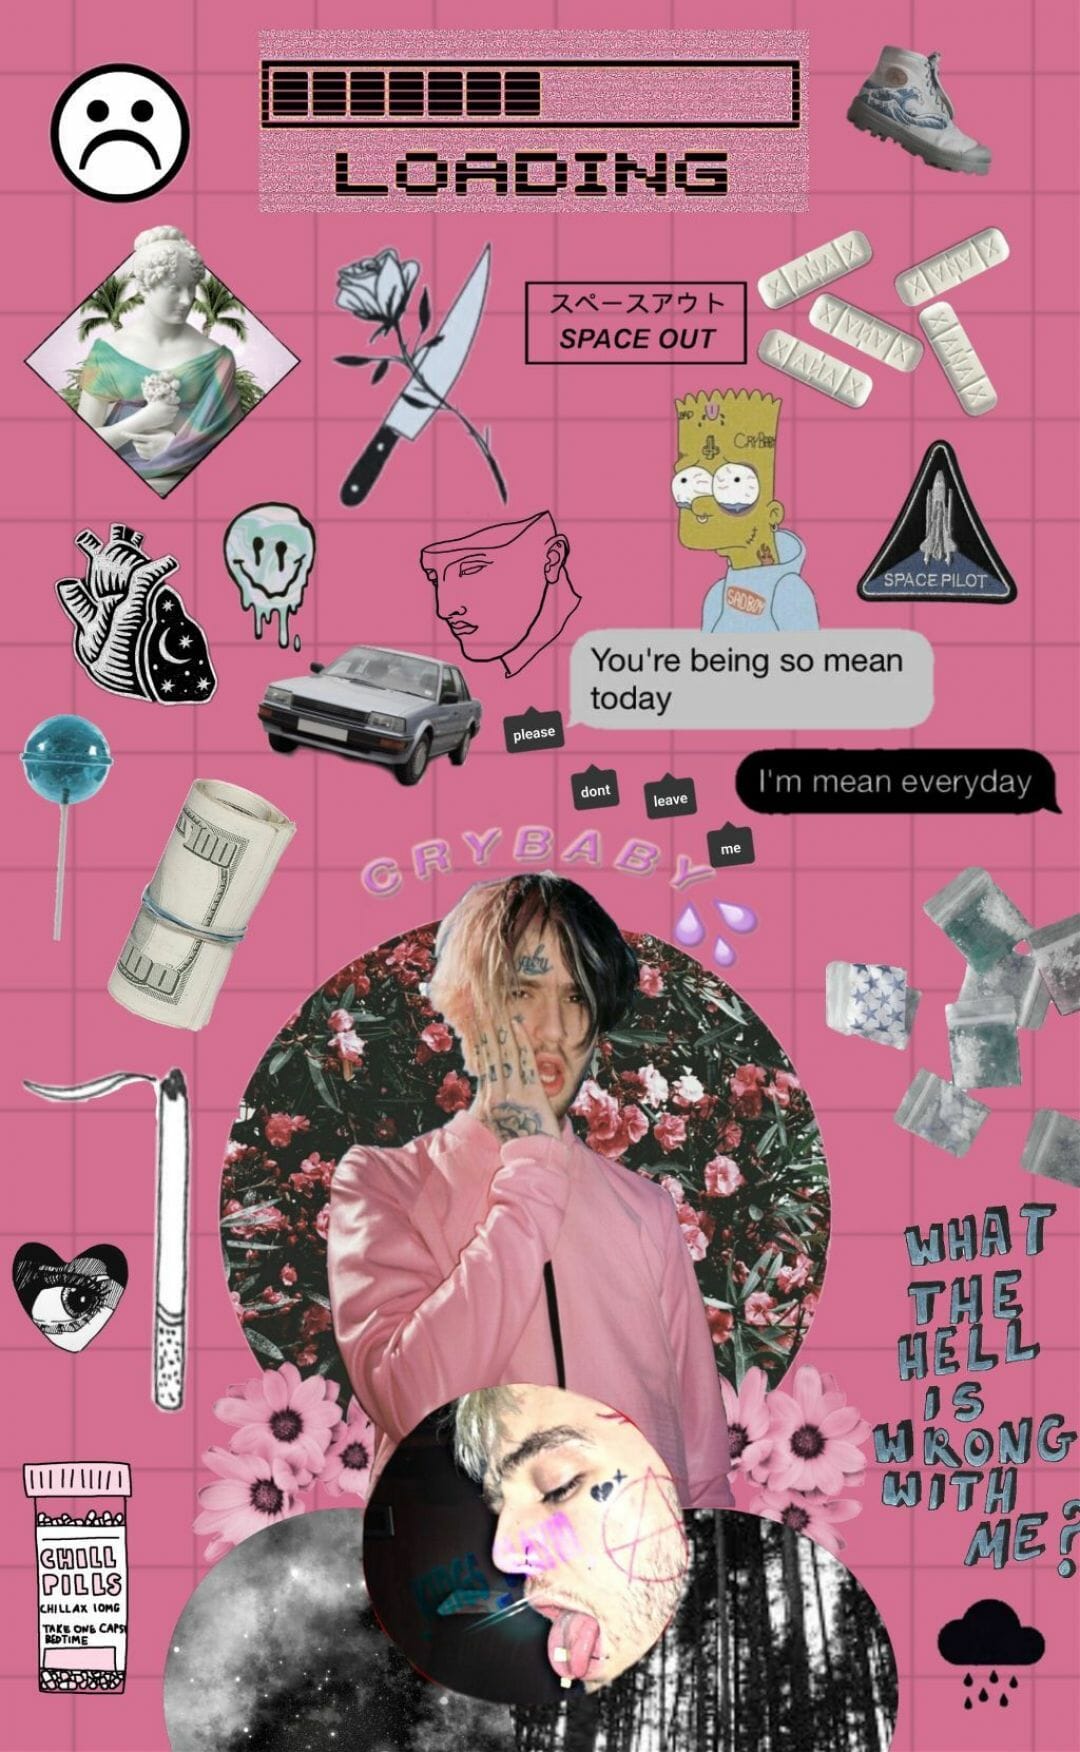 lilpeep pink collage wallpaper aesthetic / iPhone HD Wallpaper Background Download HD Wallpaper (Desktop Background / Android / iPhone) (1080p, 4k) (1080x1752)